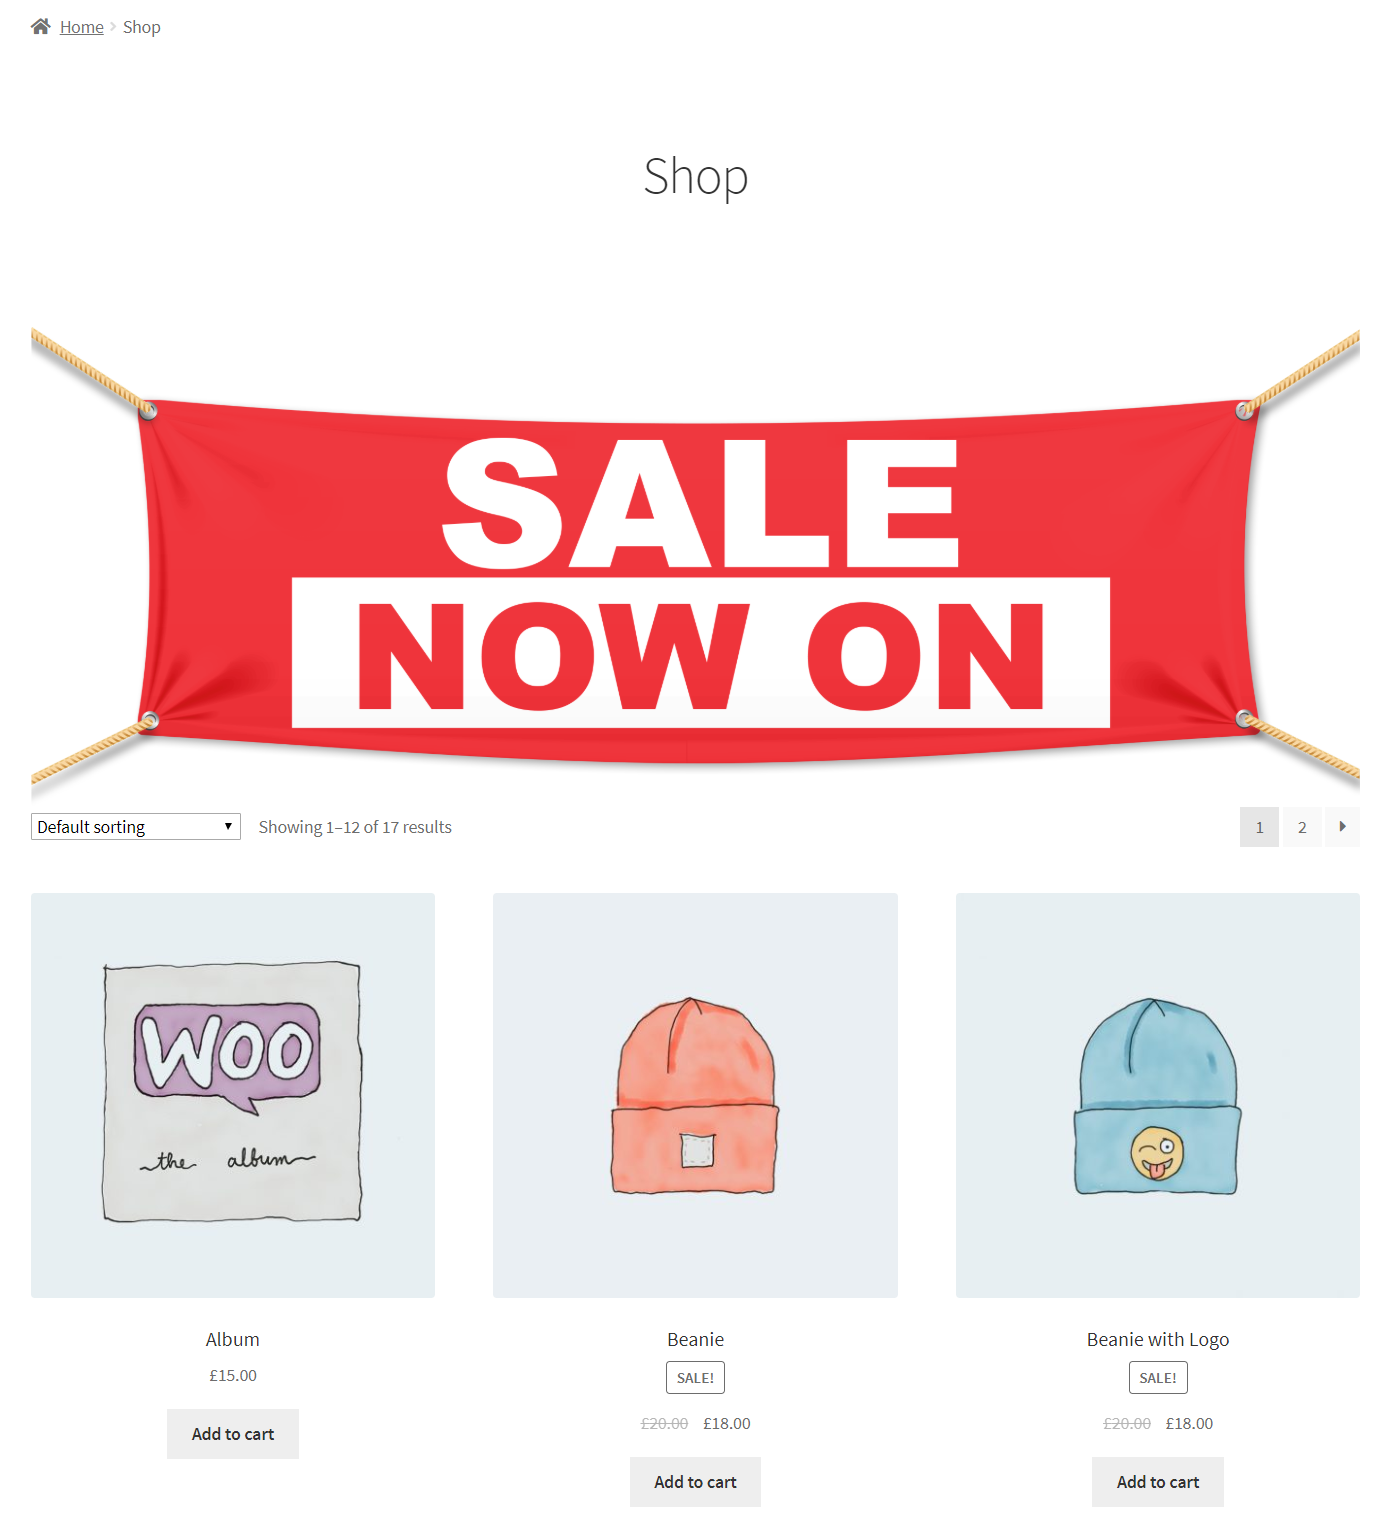 WooCommerce Banner Images (Products, Post, Categories)